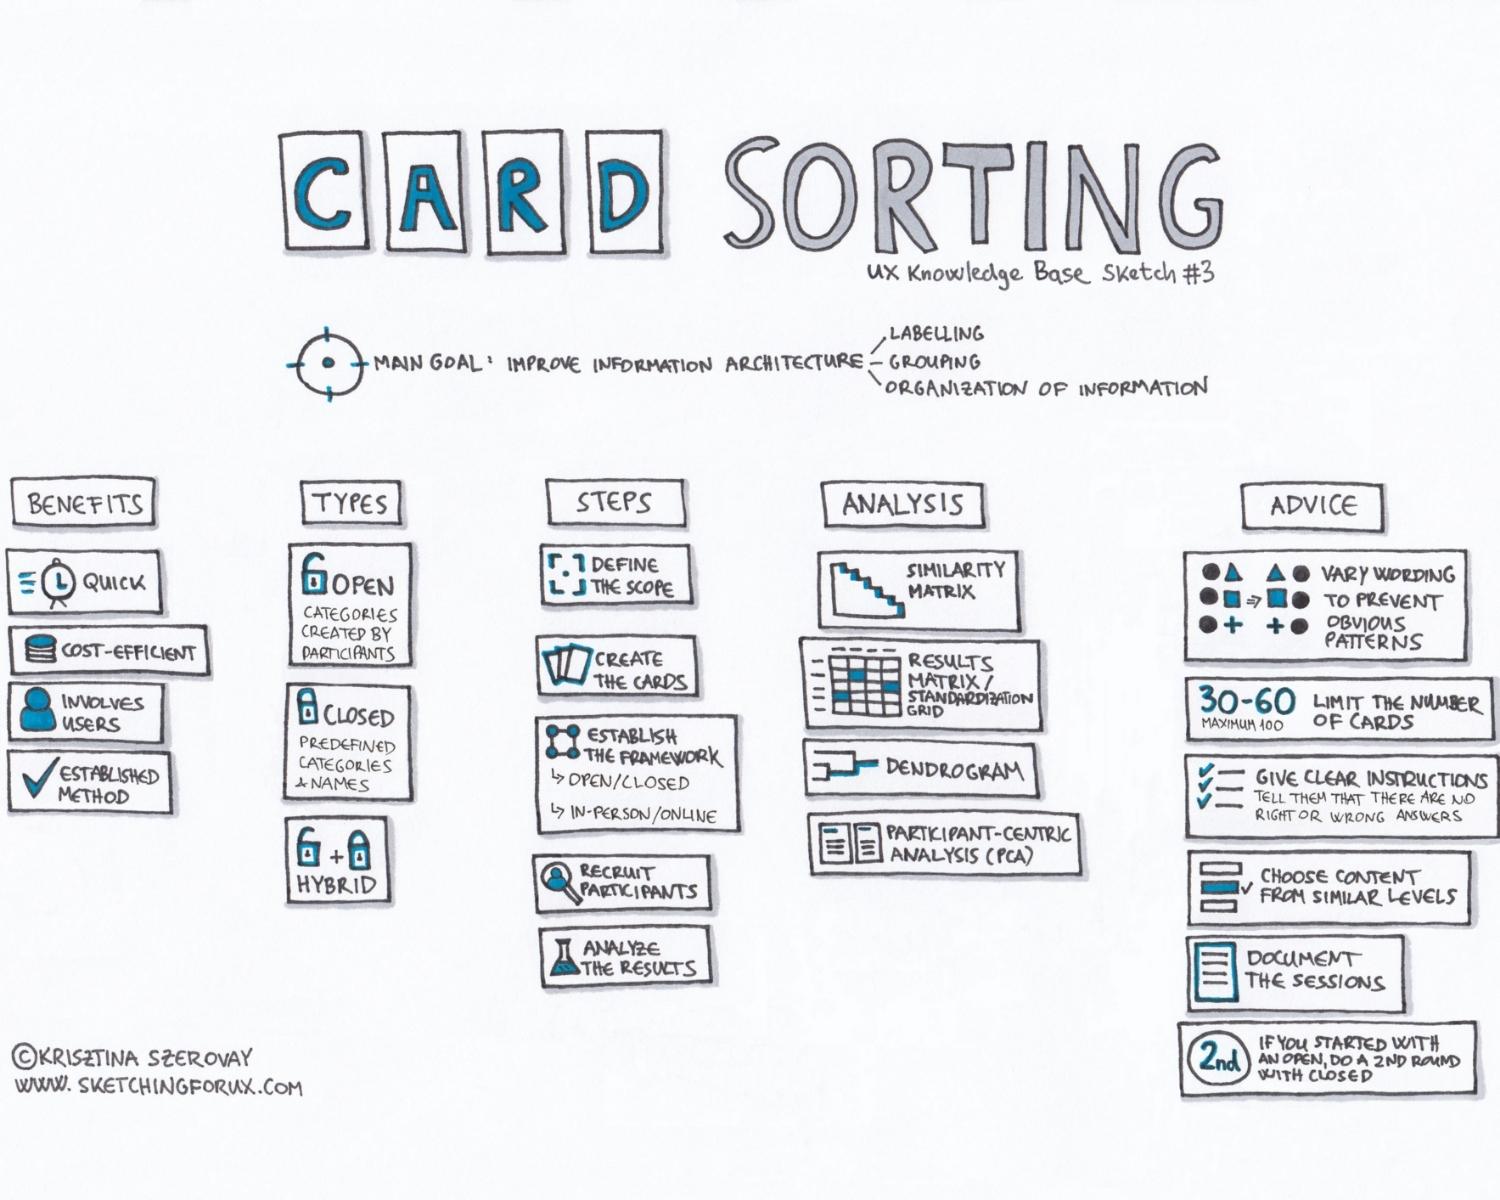 What Is Card Sorting In UX?